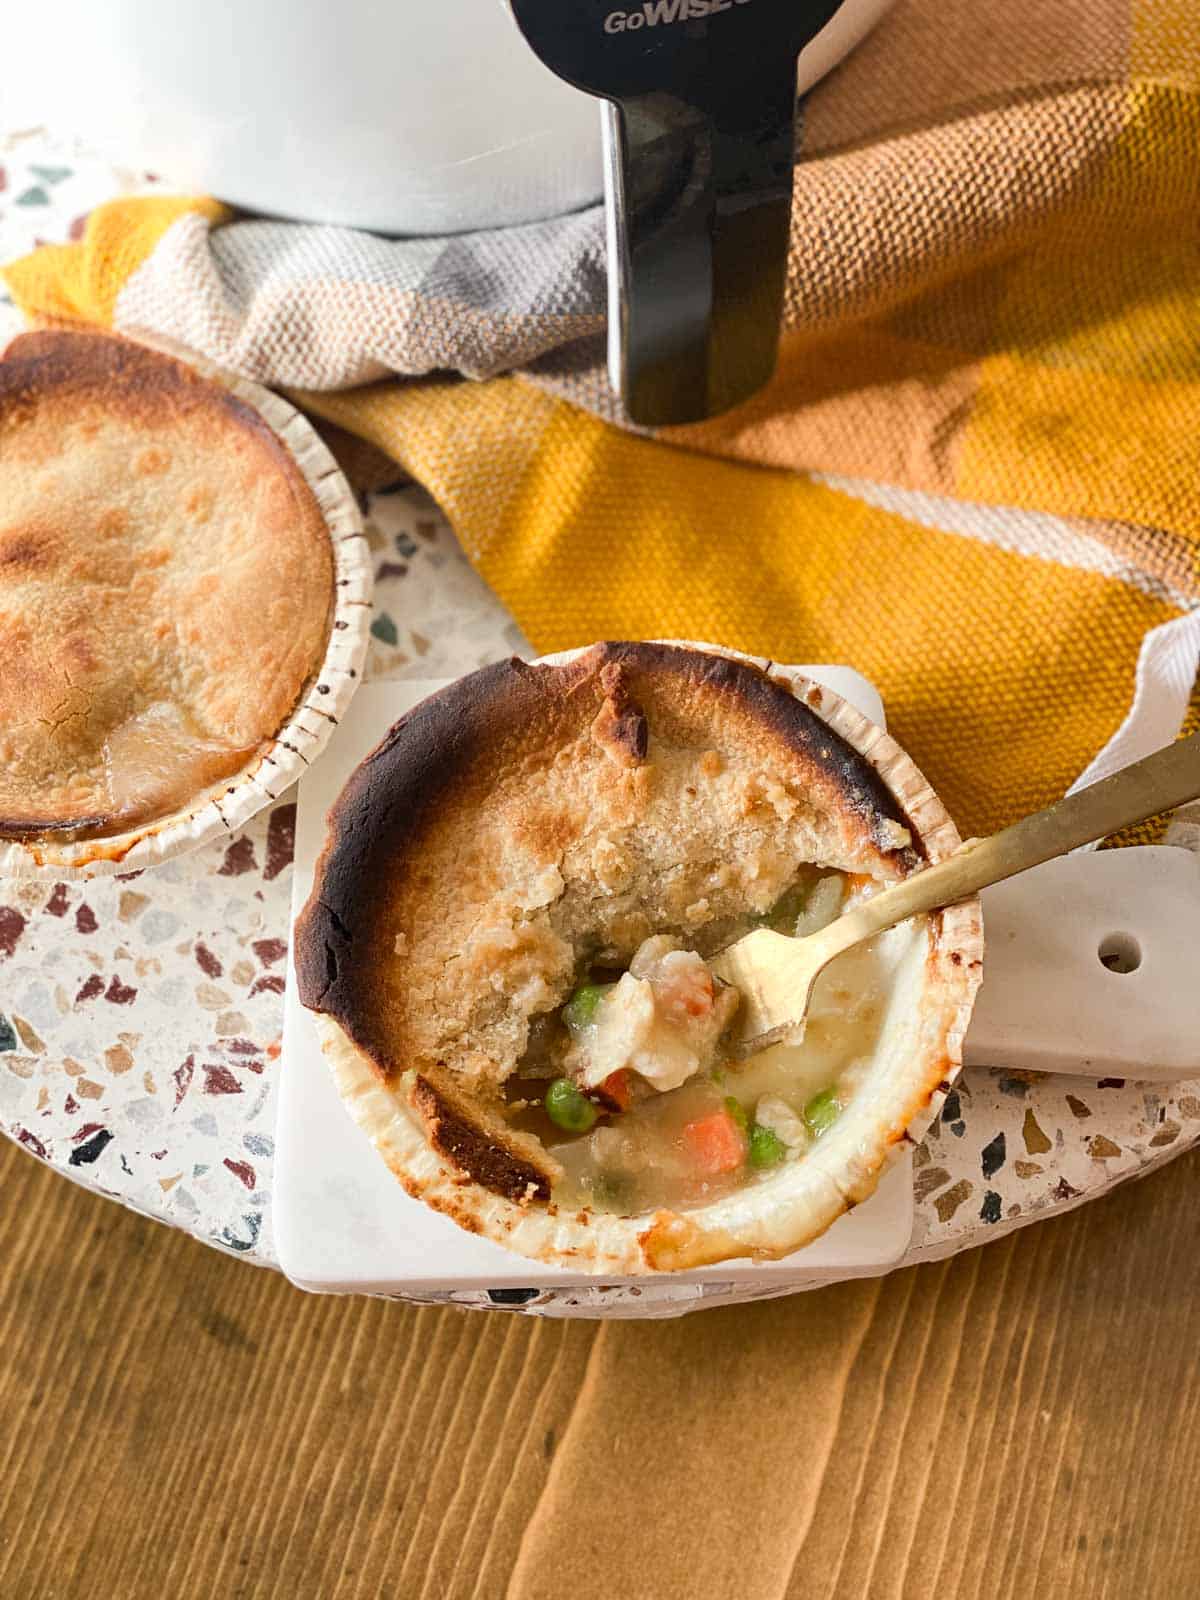 Make a delicious pot pie in air fryer in under 16 minutes! A golden brown pot pie is the perfect comfort food with creamy sauce and vegetables surrounded by crispy pie crust.